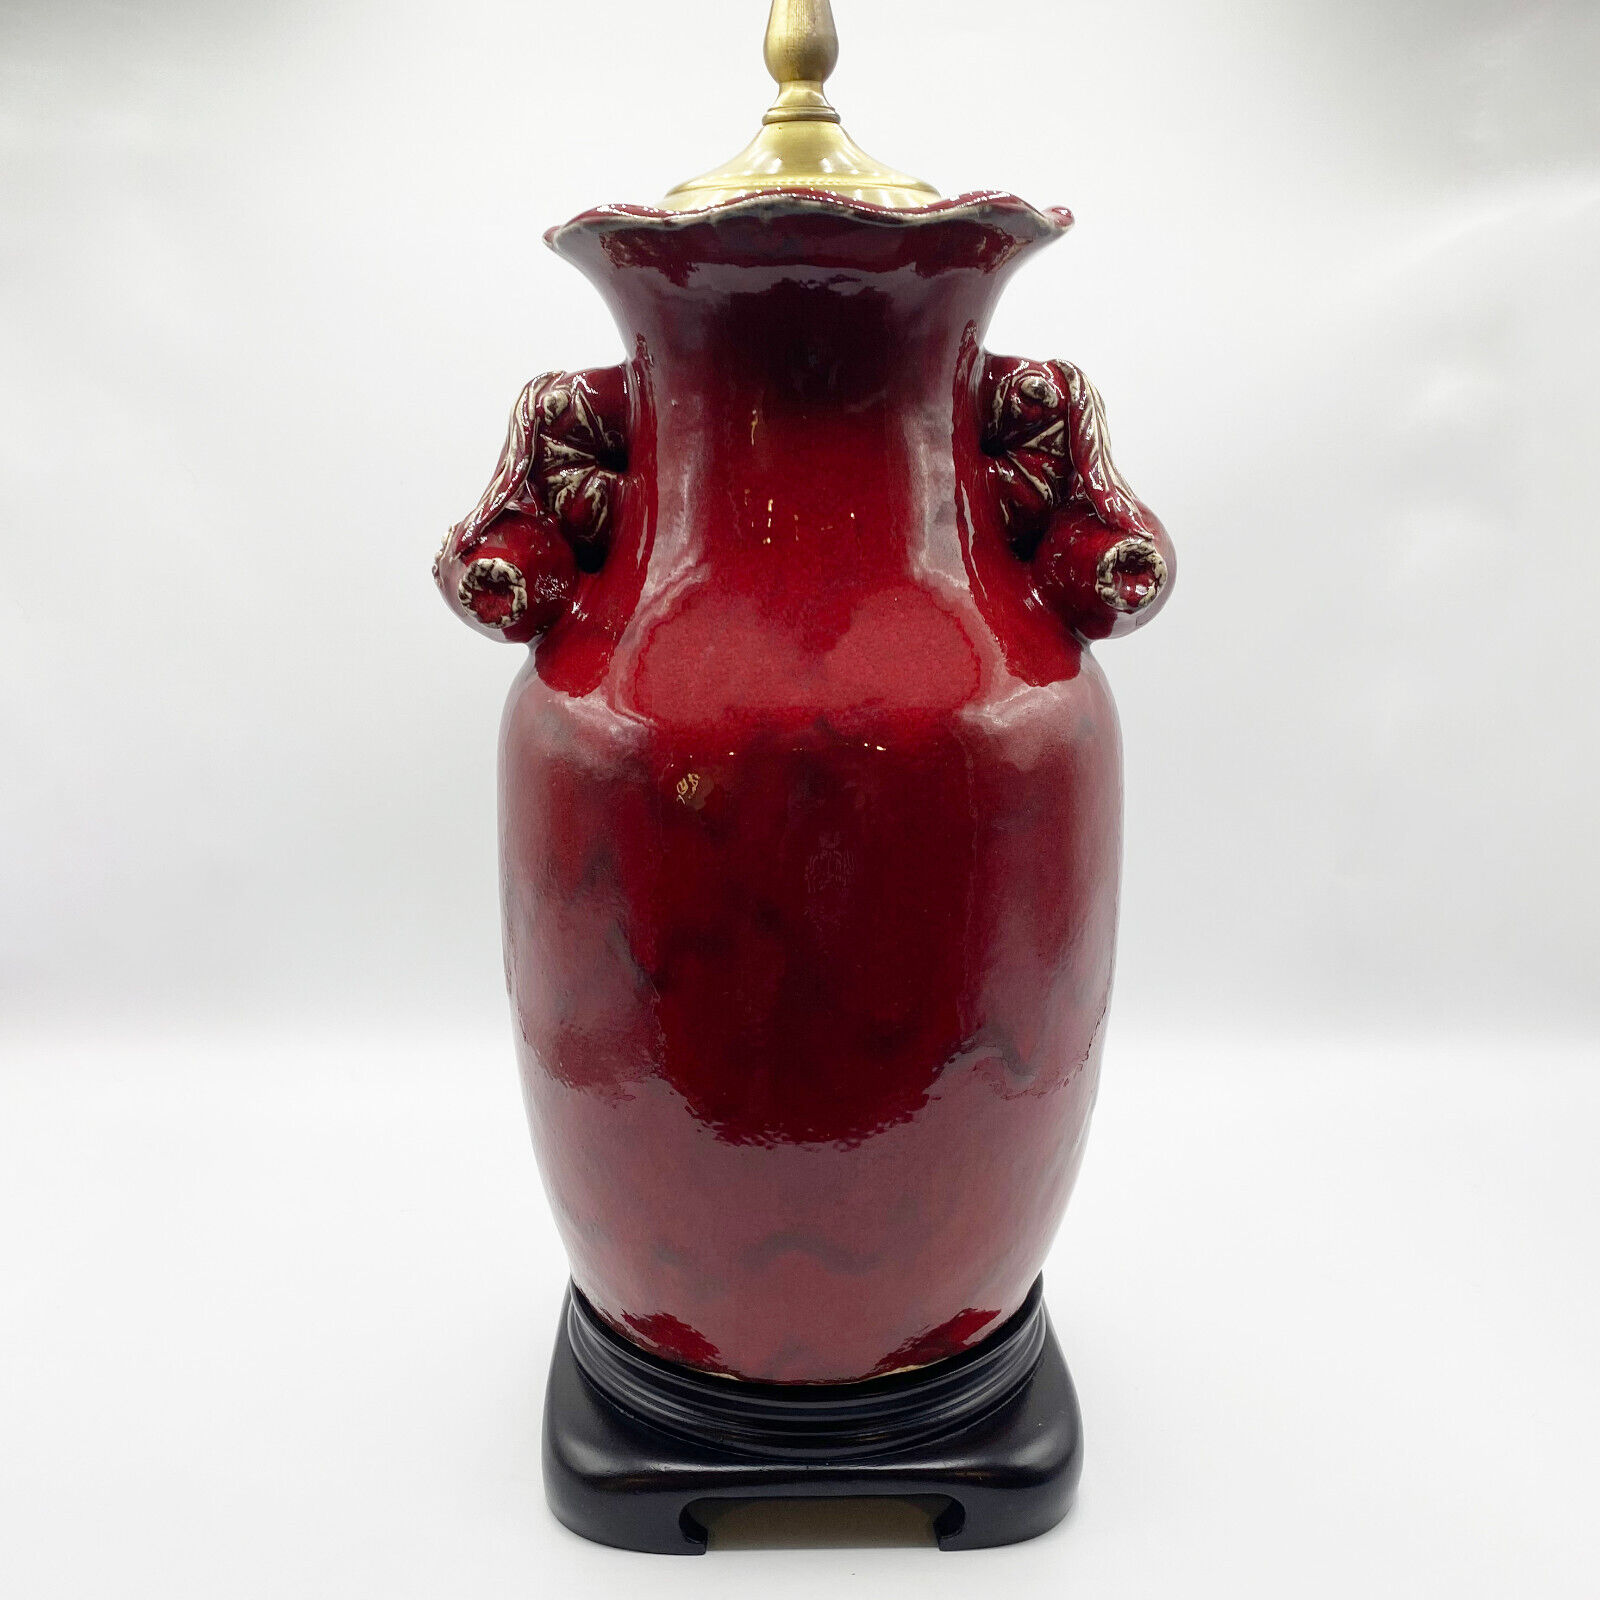 BRADBURN GALLERY Vintage Red Sang de Boeuf Table Lamp with Pomegranate Details